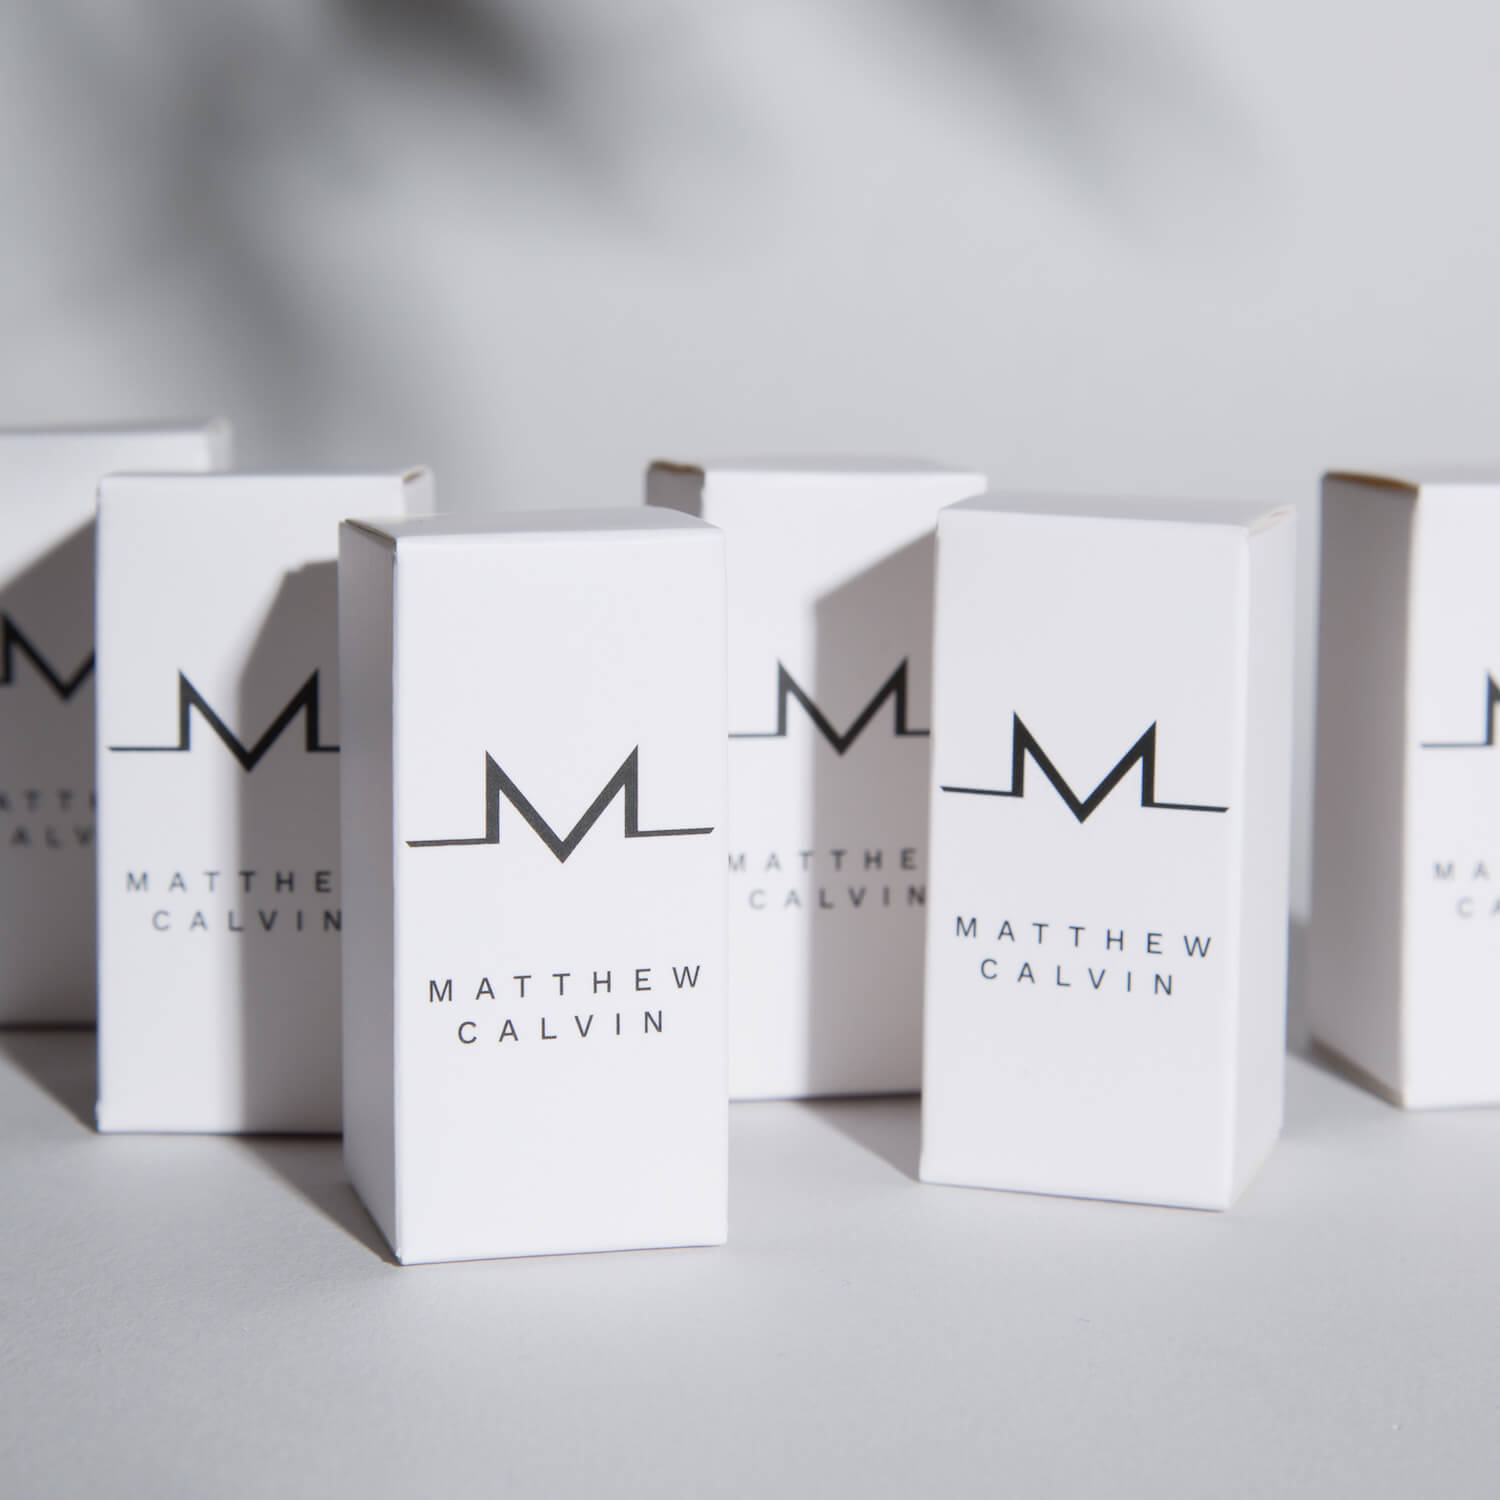 White jewellery gifting boxes for Matthew Calvin earrings